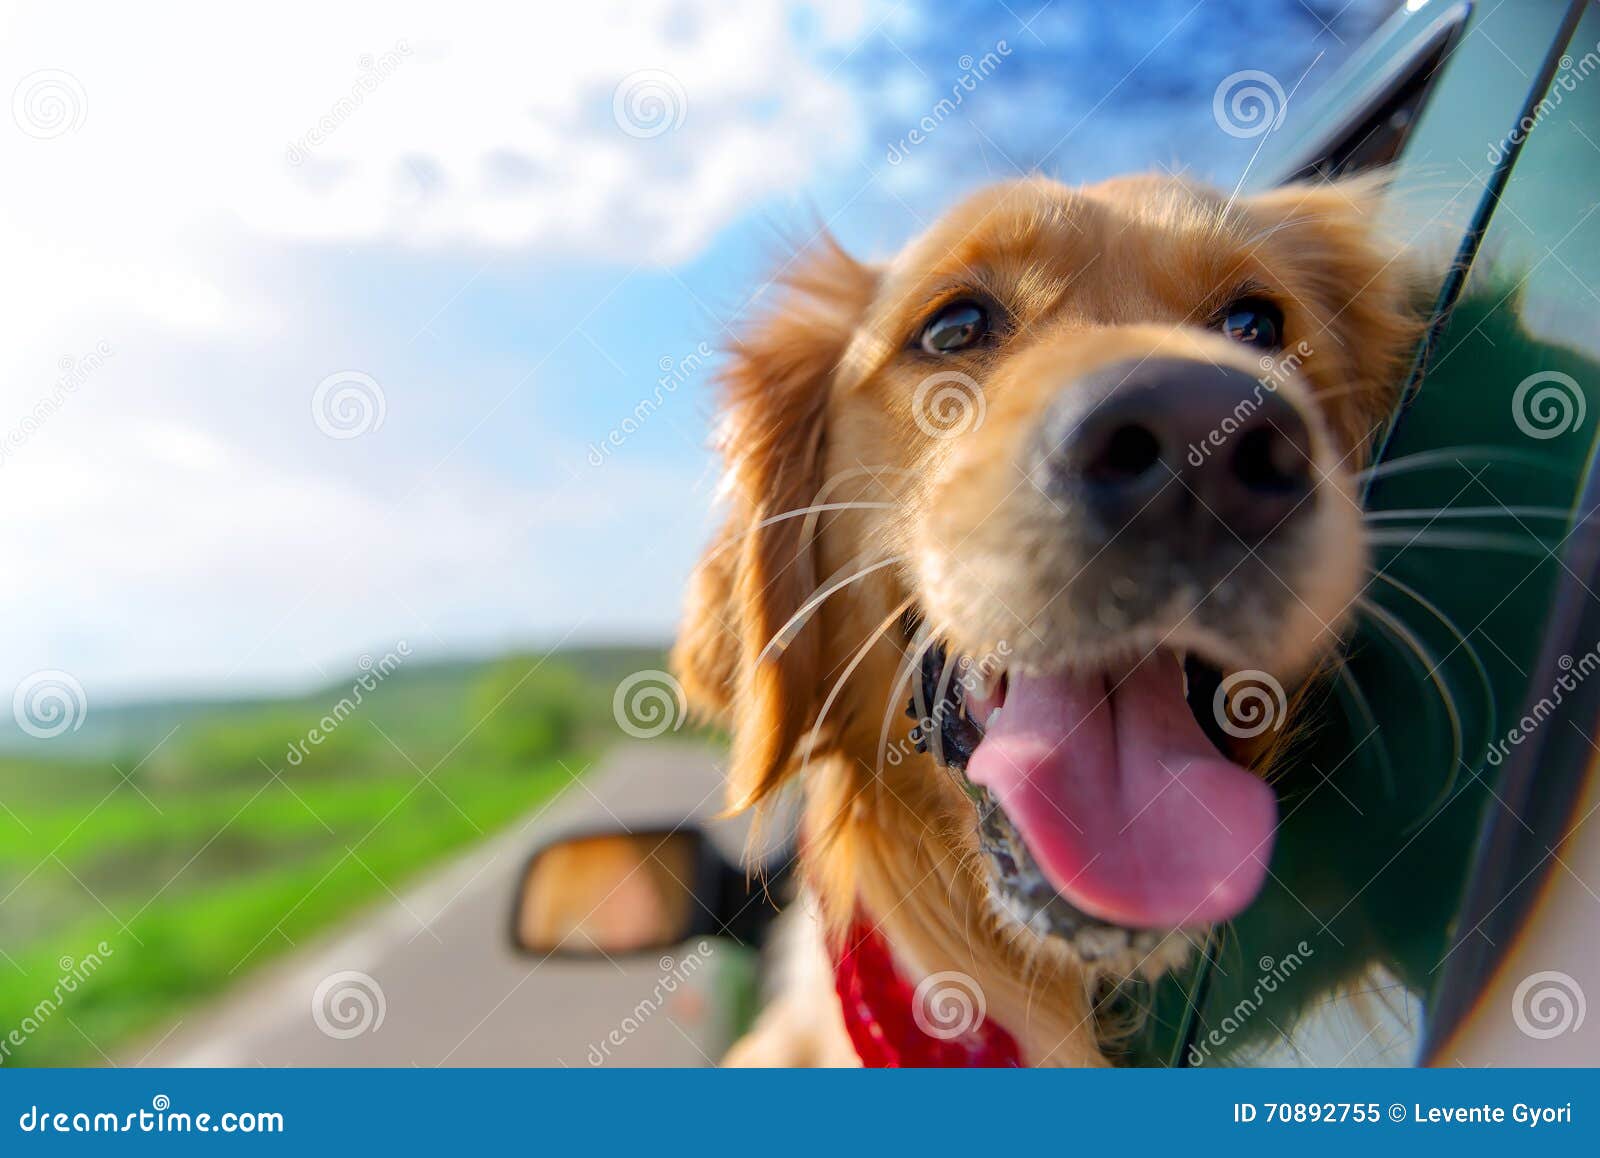 golden retriever looking out of car window